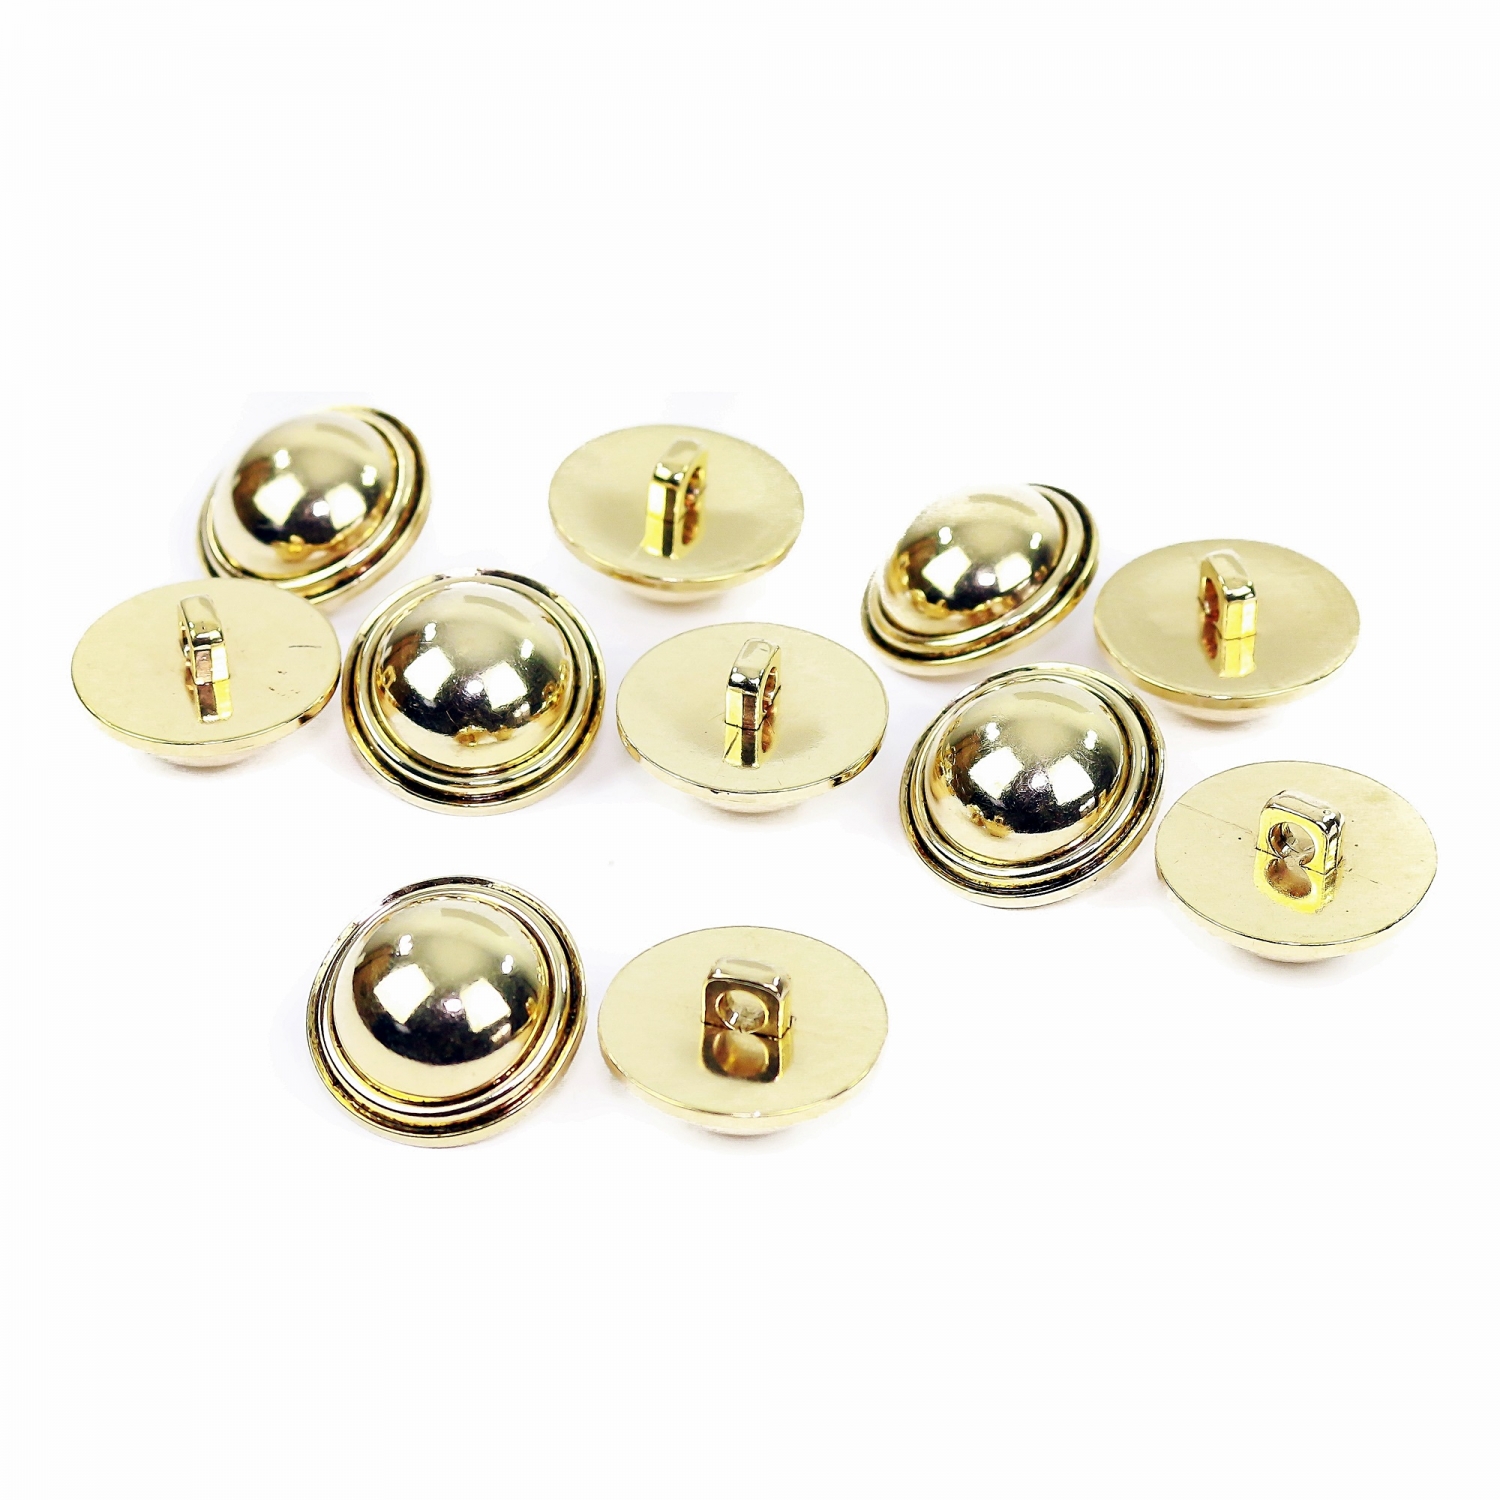 Plastic Metallized Shank Buttons, size 40 Lin (144 pcs/pack) Code: B6314